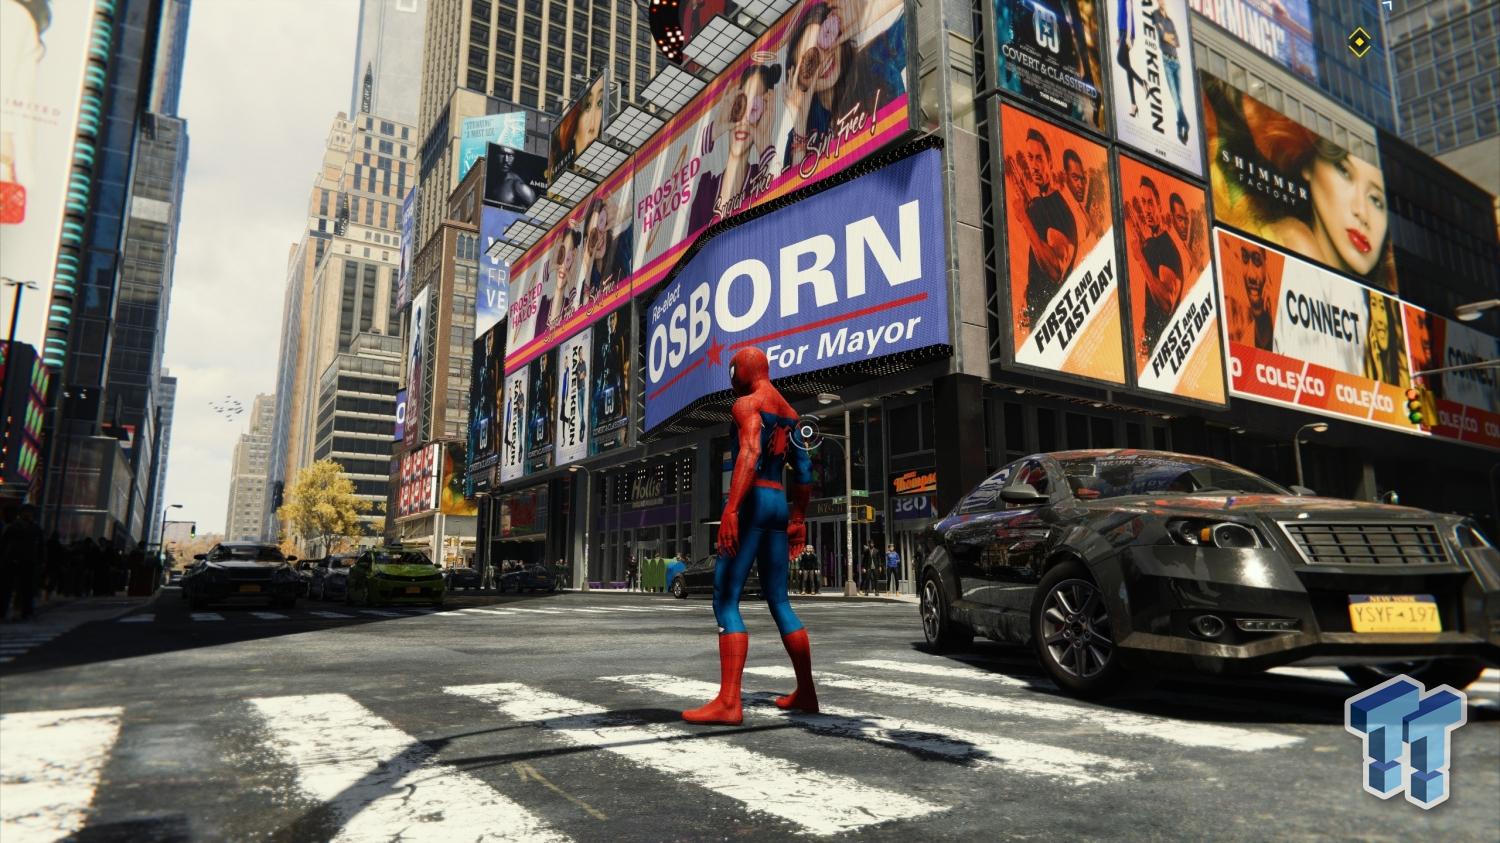 Spider-Man 2 PlayStation 5 Console: Where to Buy Online – Billboard